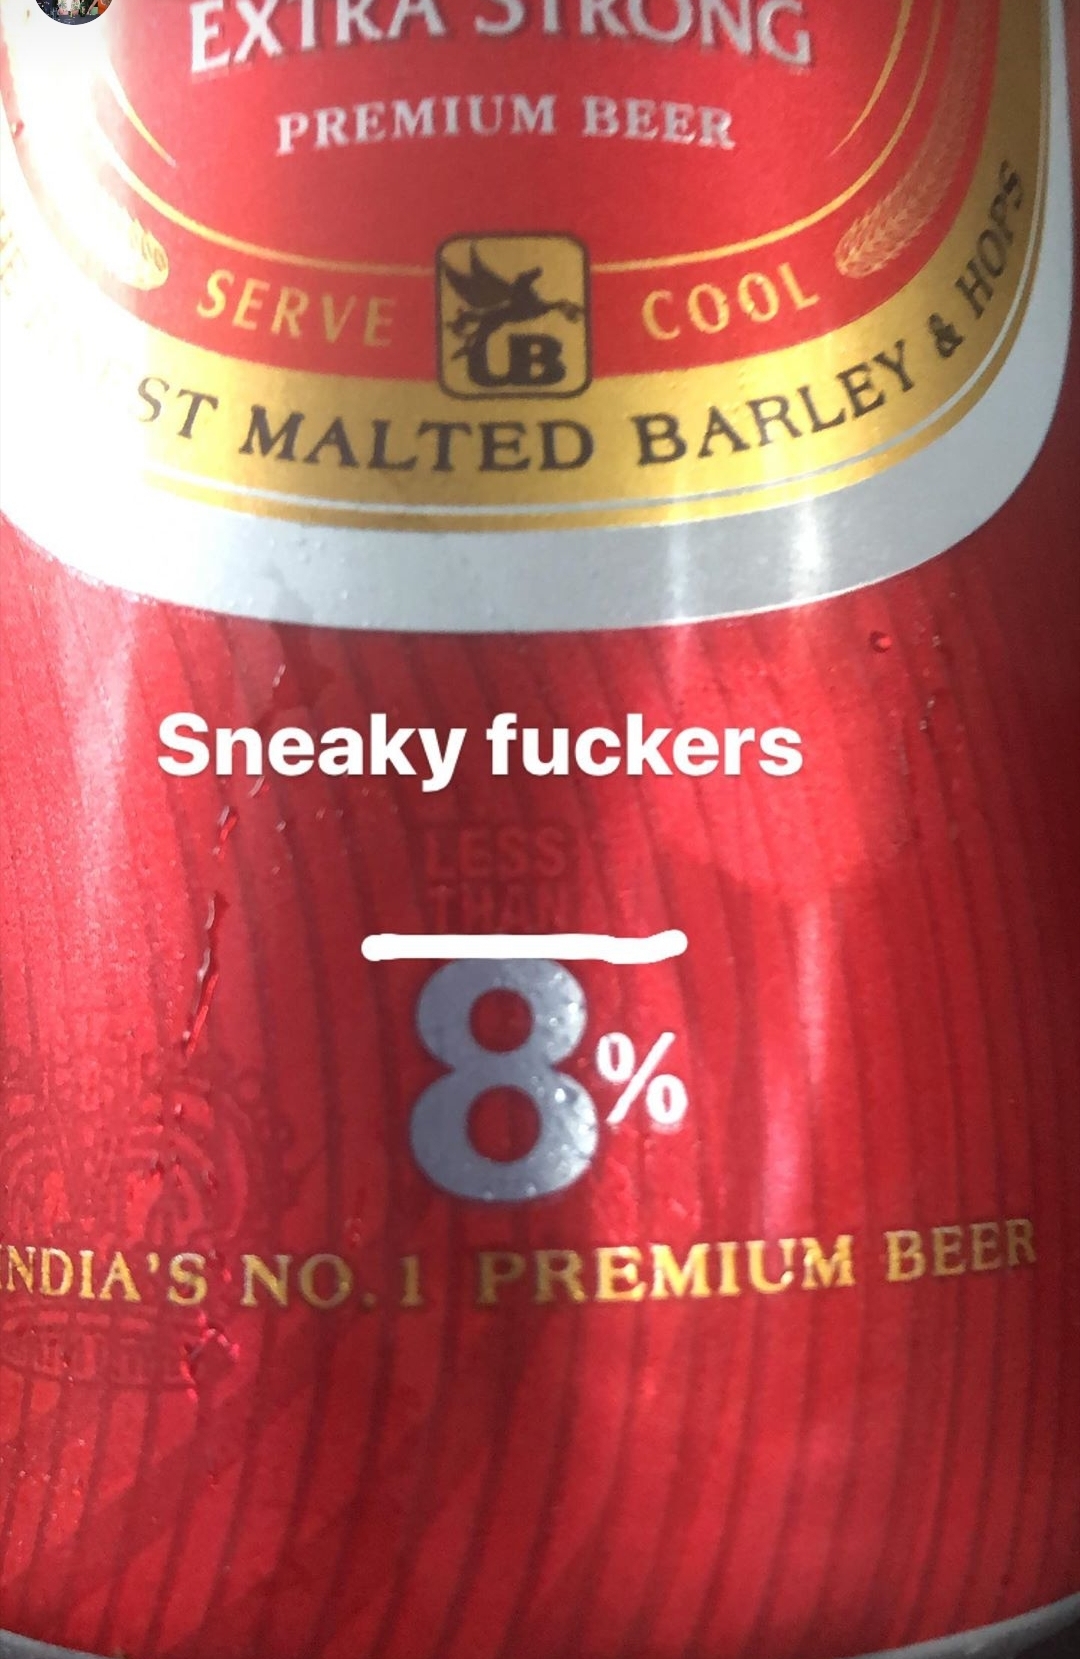 funny design fails - drink - Ex Premium Beer Hops Serve Cool St Malted Barley B Sneaky fuckers % Ndia'S No.1 Premium Beer